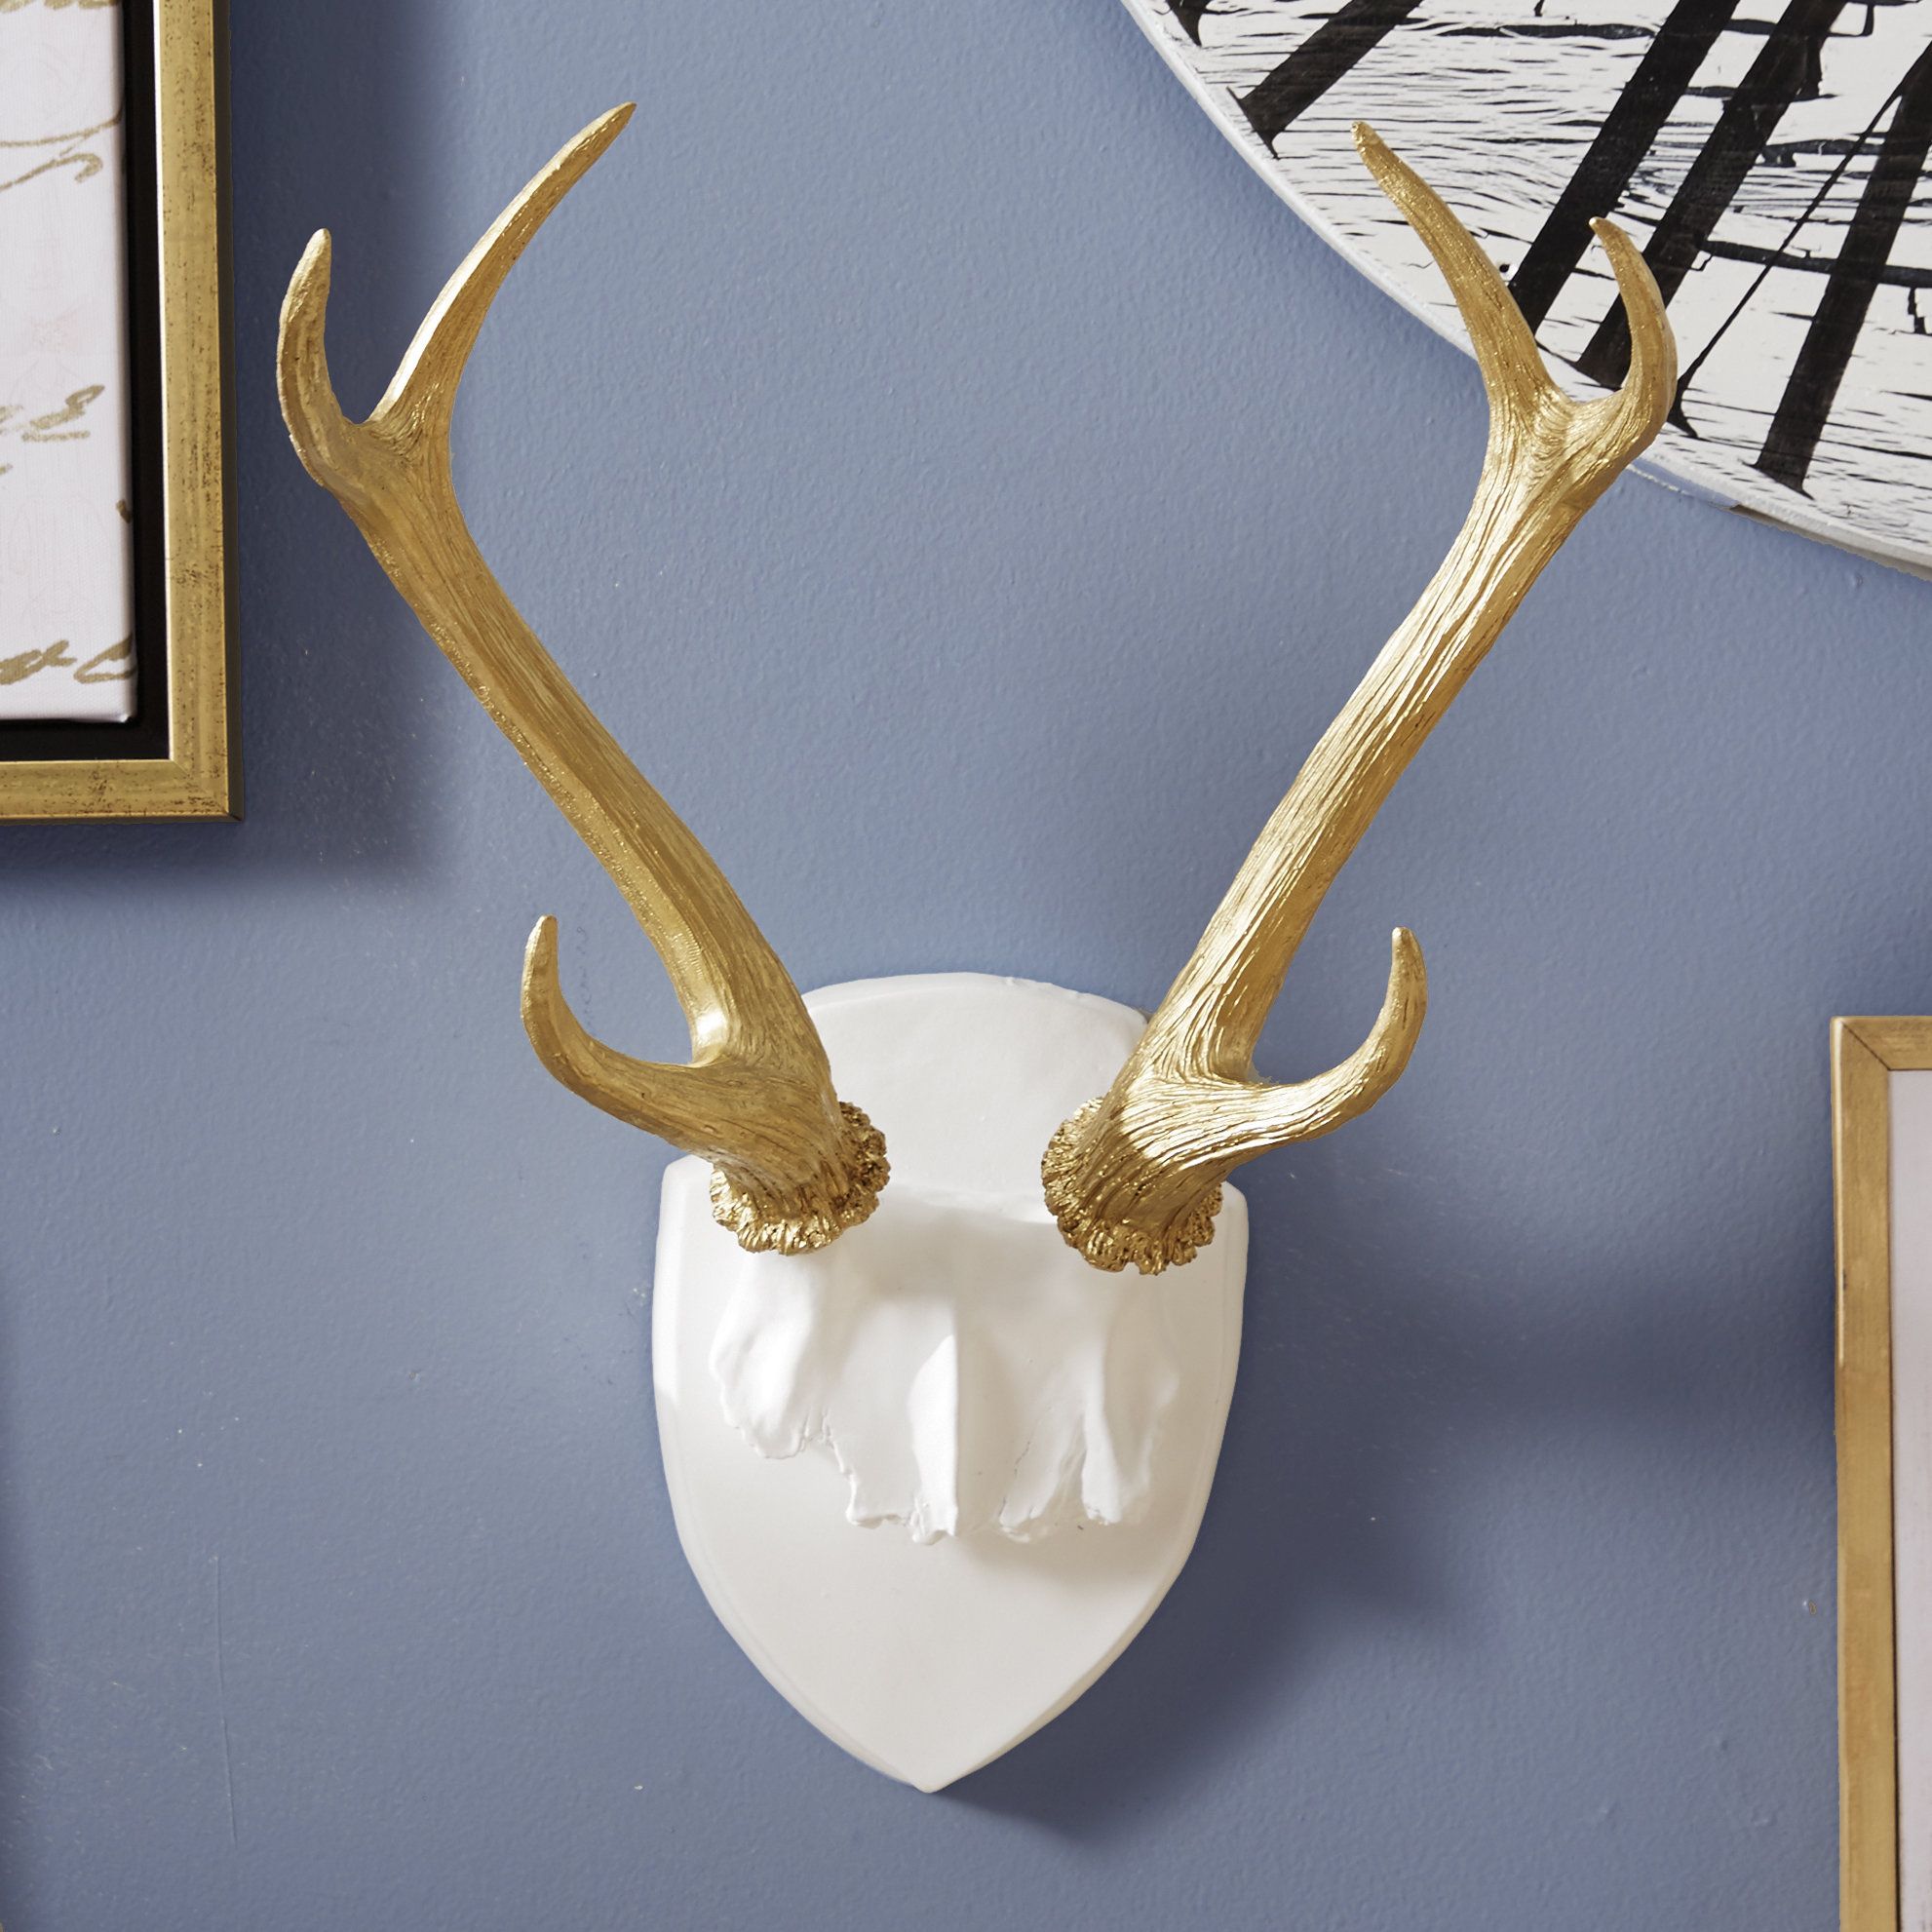 Brayden Studio Large Faux Taxidermy Antler Rack Wall Décor & Reviews Inside Most Up To Date Large Deer Head Faux Taxidermy Wall Decor (View 18 of 20)